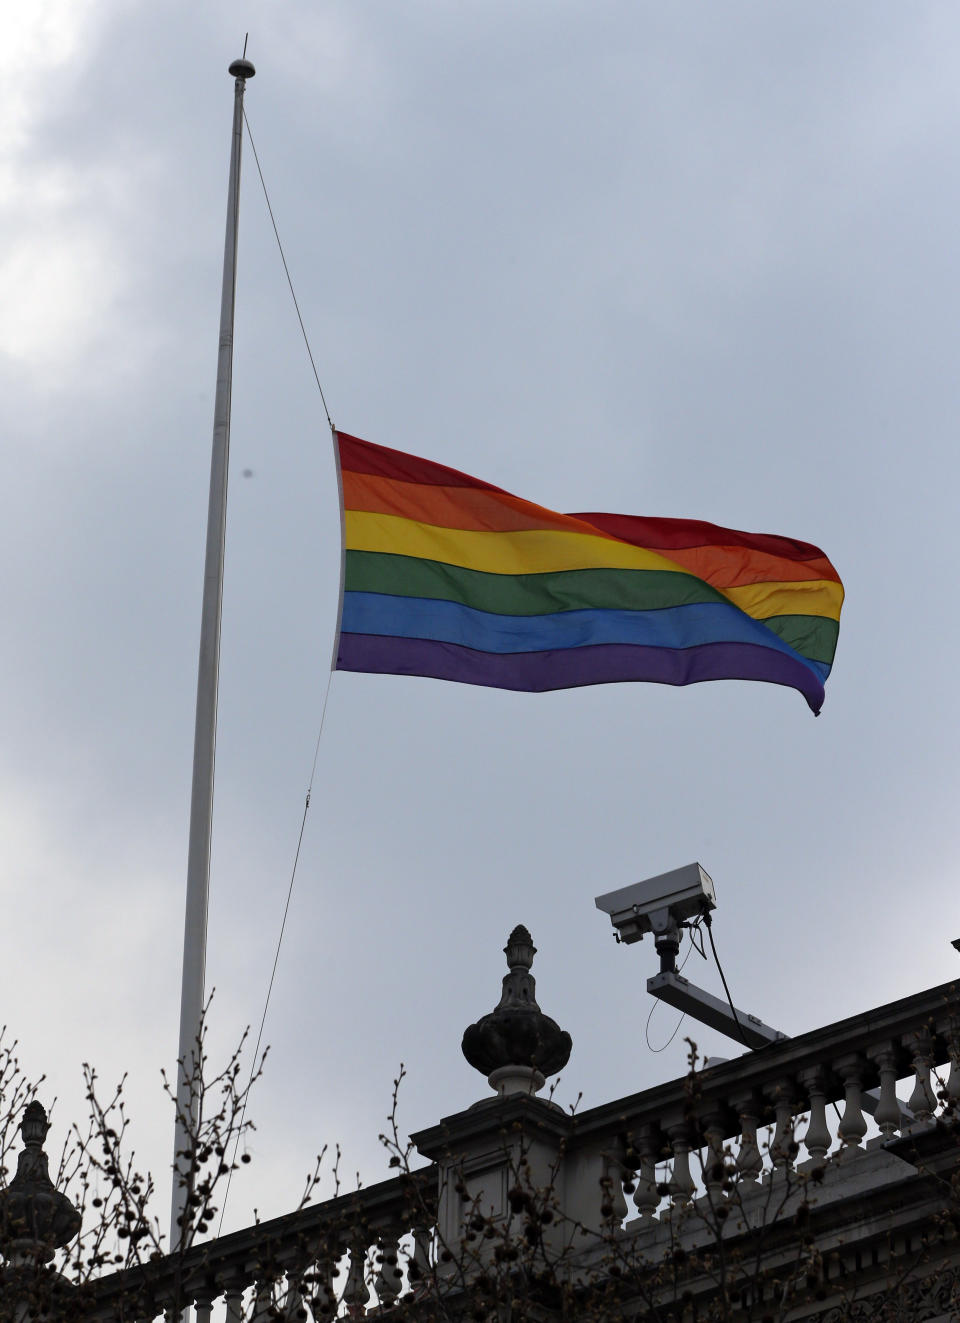 The rainbow flag, a symbol of the lesbian, gay, bisexual, and transgender community, flies over the British government Cabinet Office's building in central London, Friday, March 28, 2014, to mark the start of same-sex weddings in the UK from Saturday March 29, 2014. The British government has ordered rainbow flags flown over two prominent government buildings to mark the country’s first same-sex weddings, ahead of the law taking effect on Saturday. It marks a profound shift in attitudes in a country that little more than a decade ago had a law on the books banning the "promotion" of homosexuality. (AP Photo/Lefteris Pitarakis)